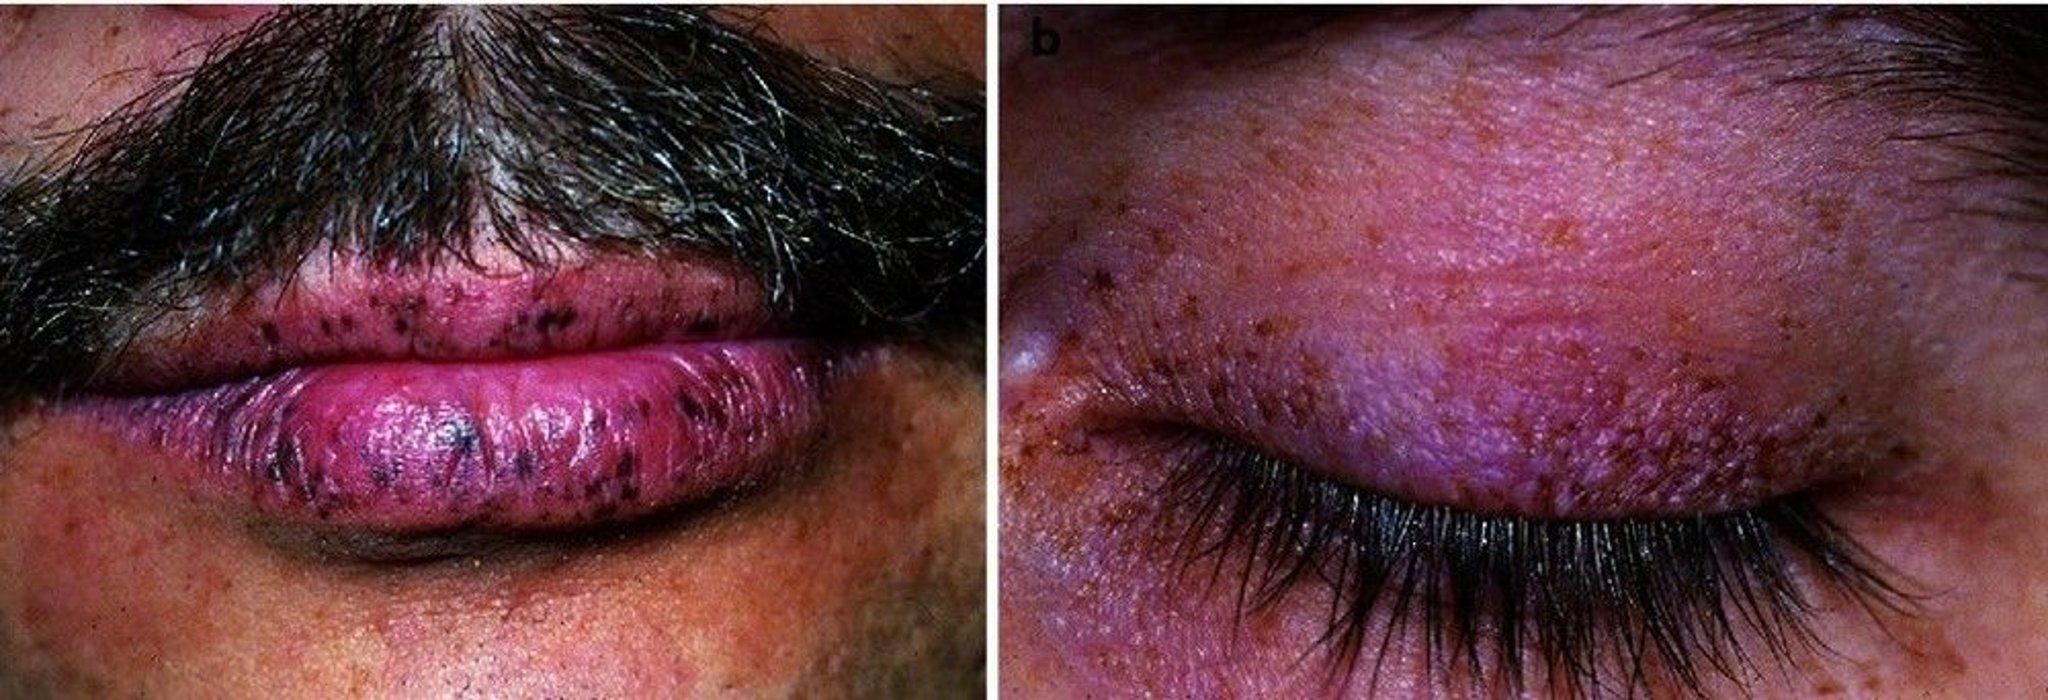 Bluish Black Spots on the Skin and on the Lips (Peutz-Jeghers Syndrome)